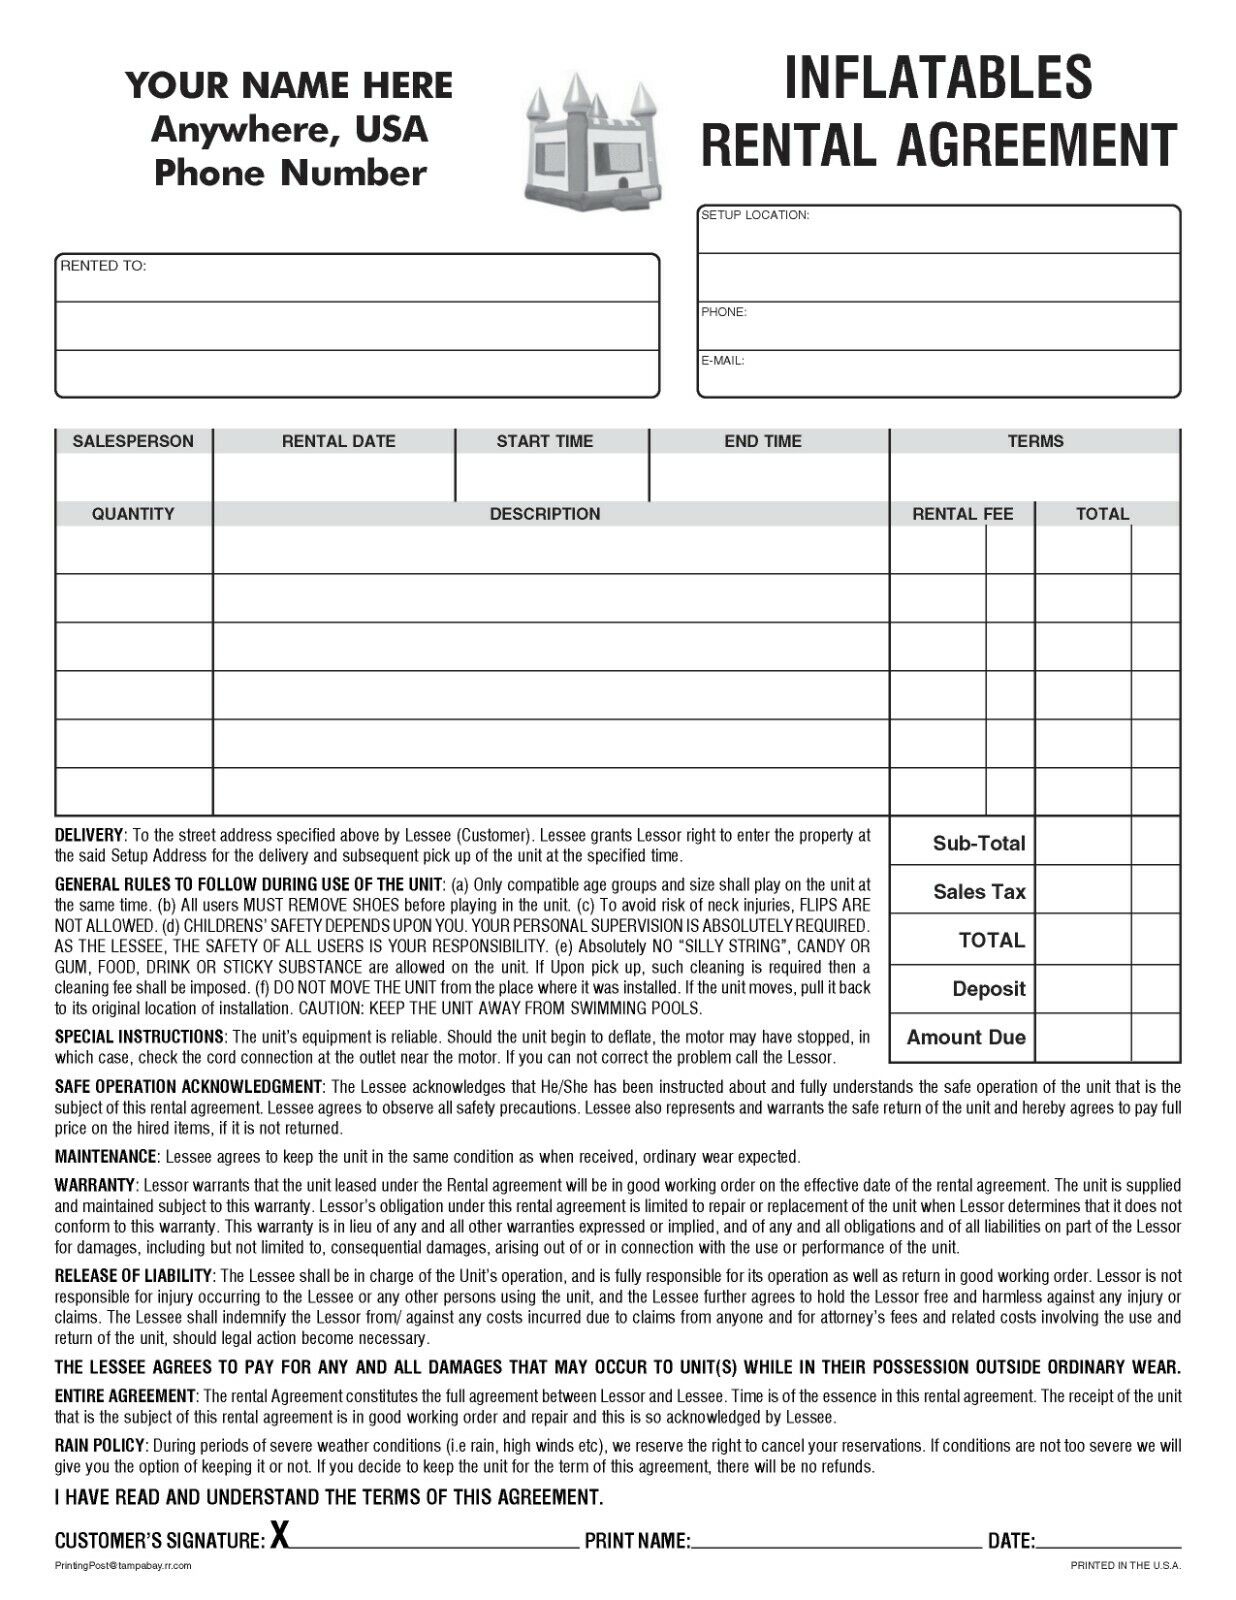 100 Inflatables Bounce House Party Rental Agreement 2 part Forms EBay